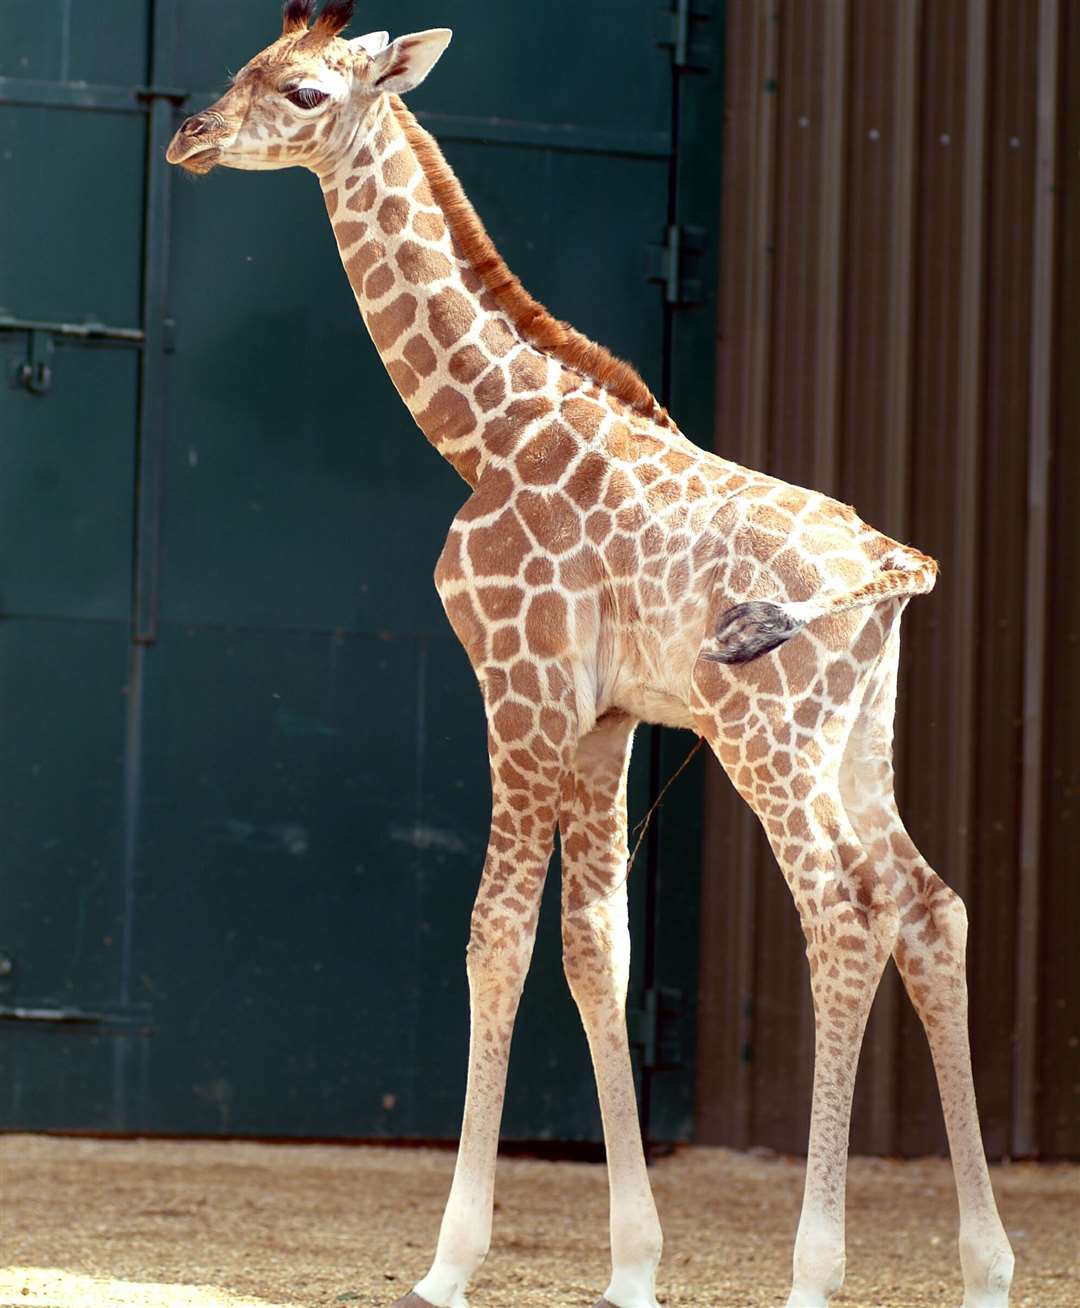 Another giraffe born at the reserve in 2006